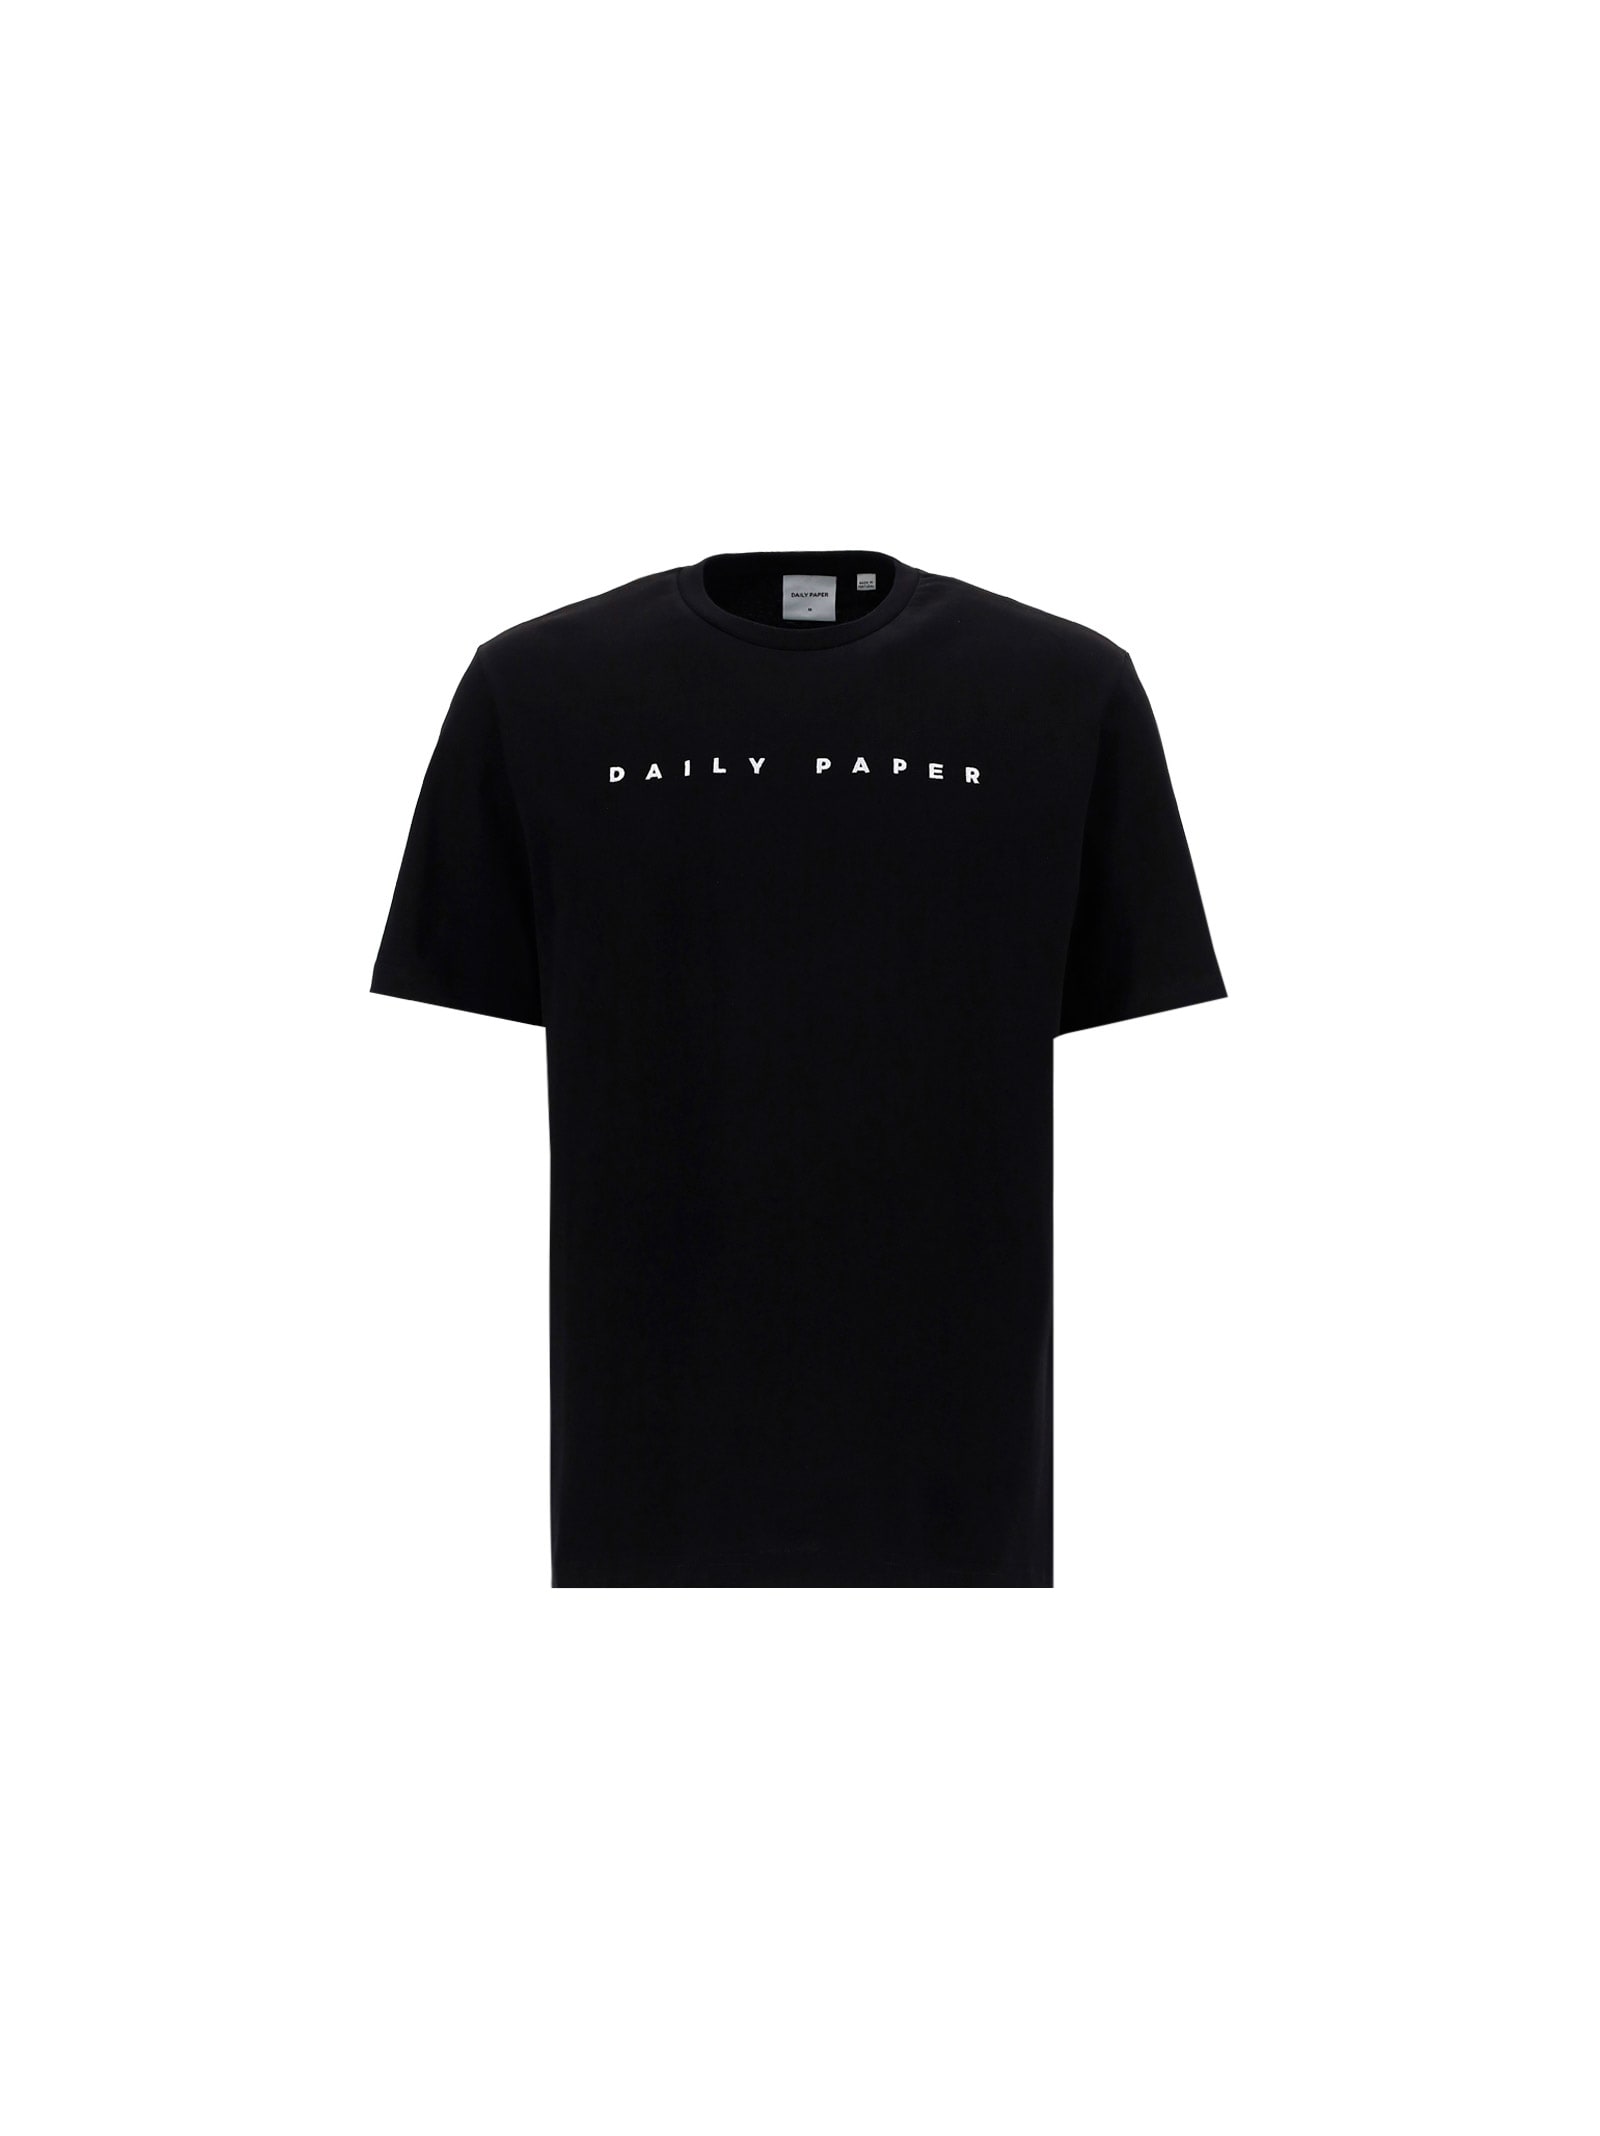 Daily Paper T-SHIRT BY DAILY PAPER